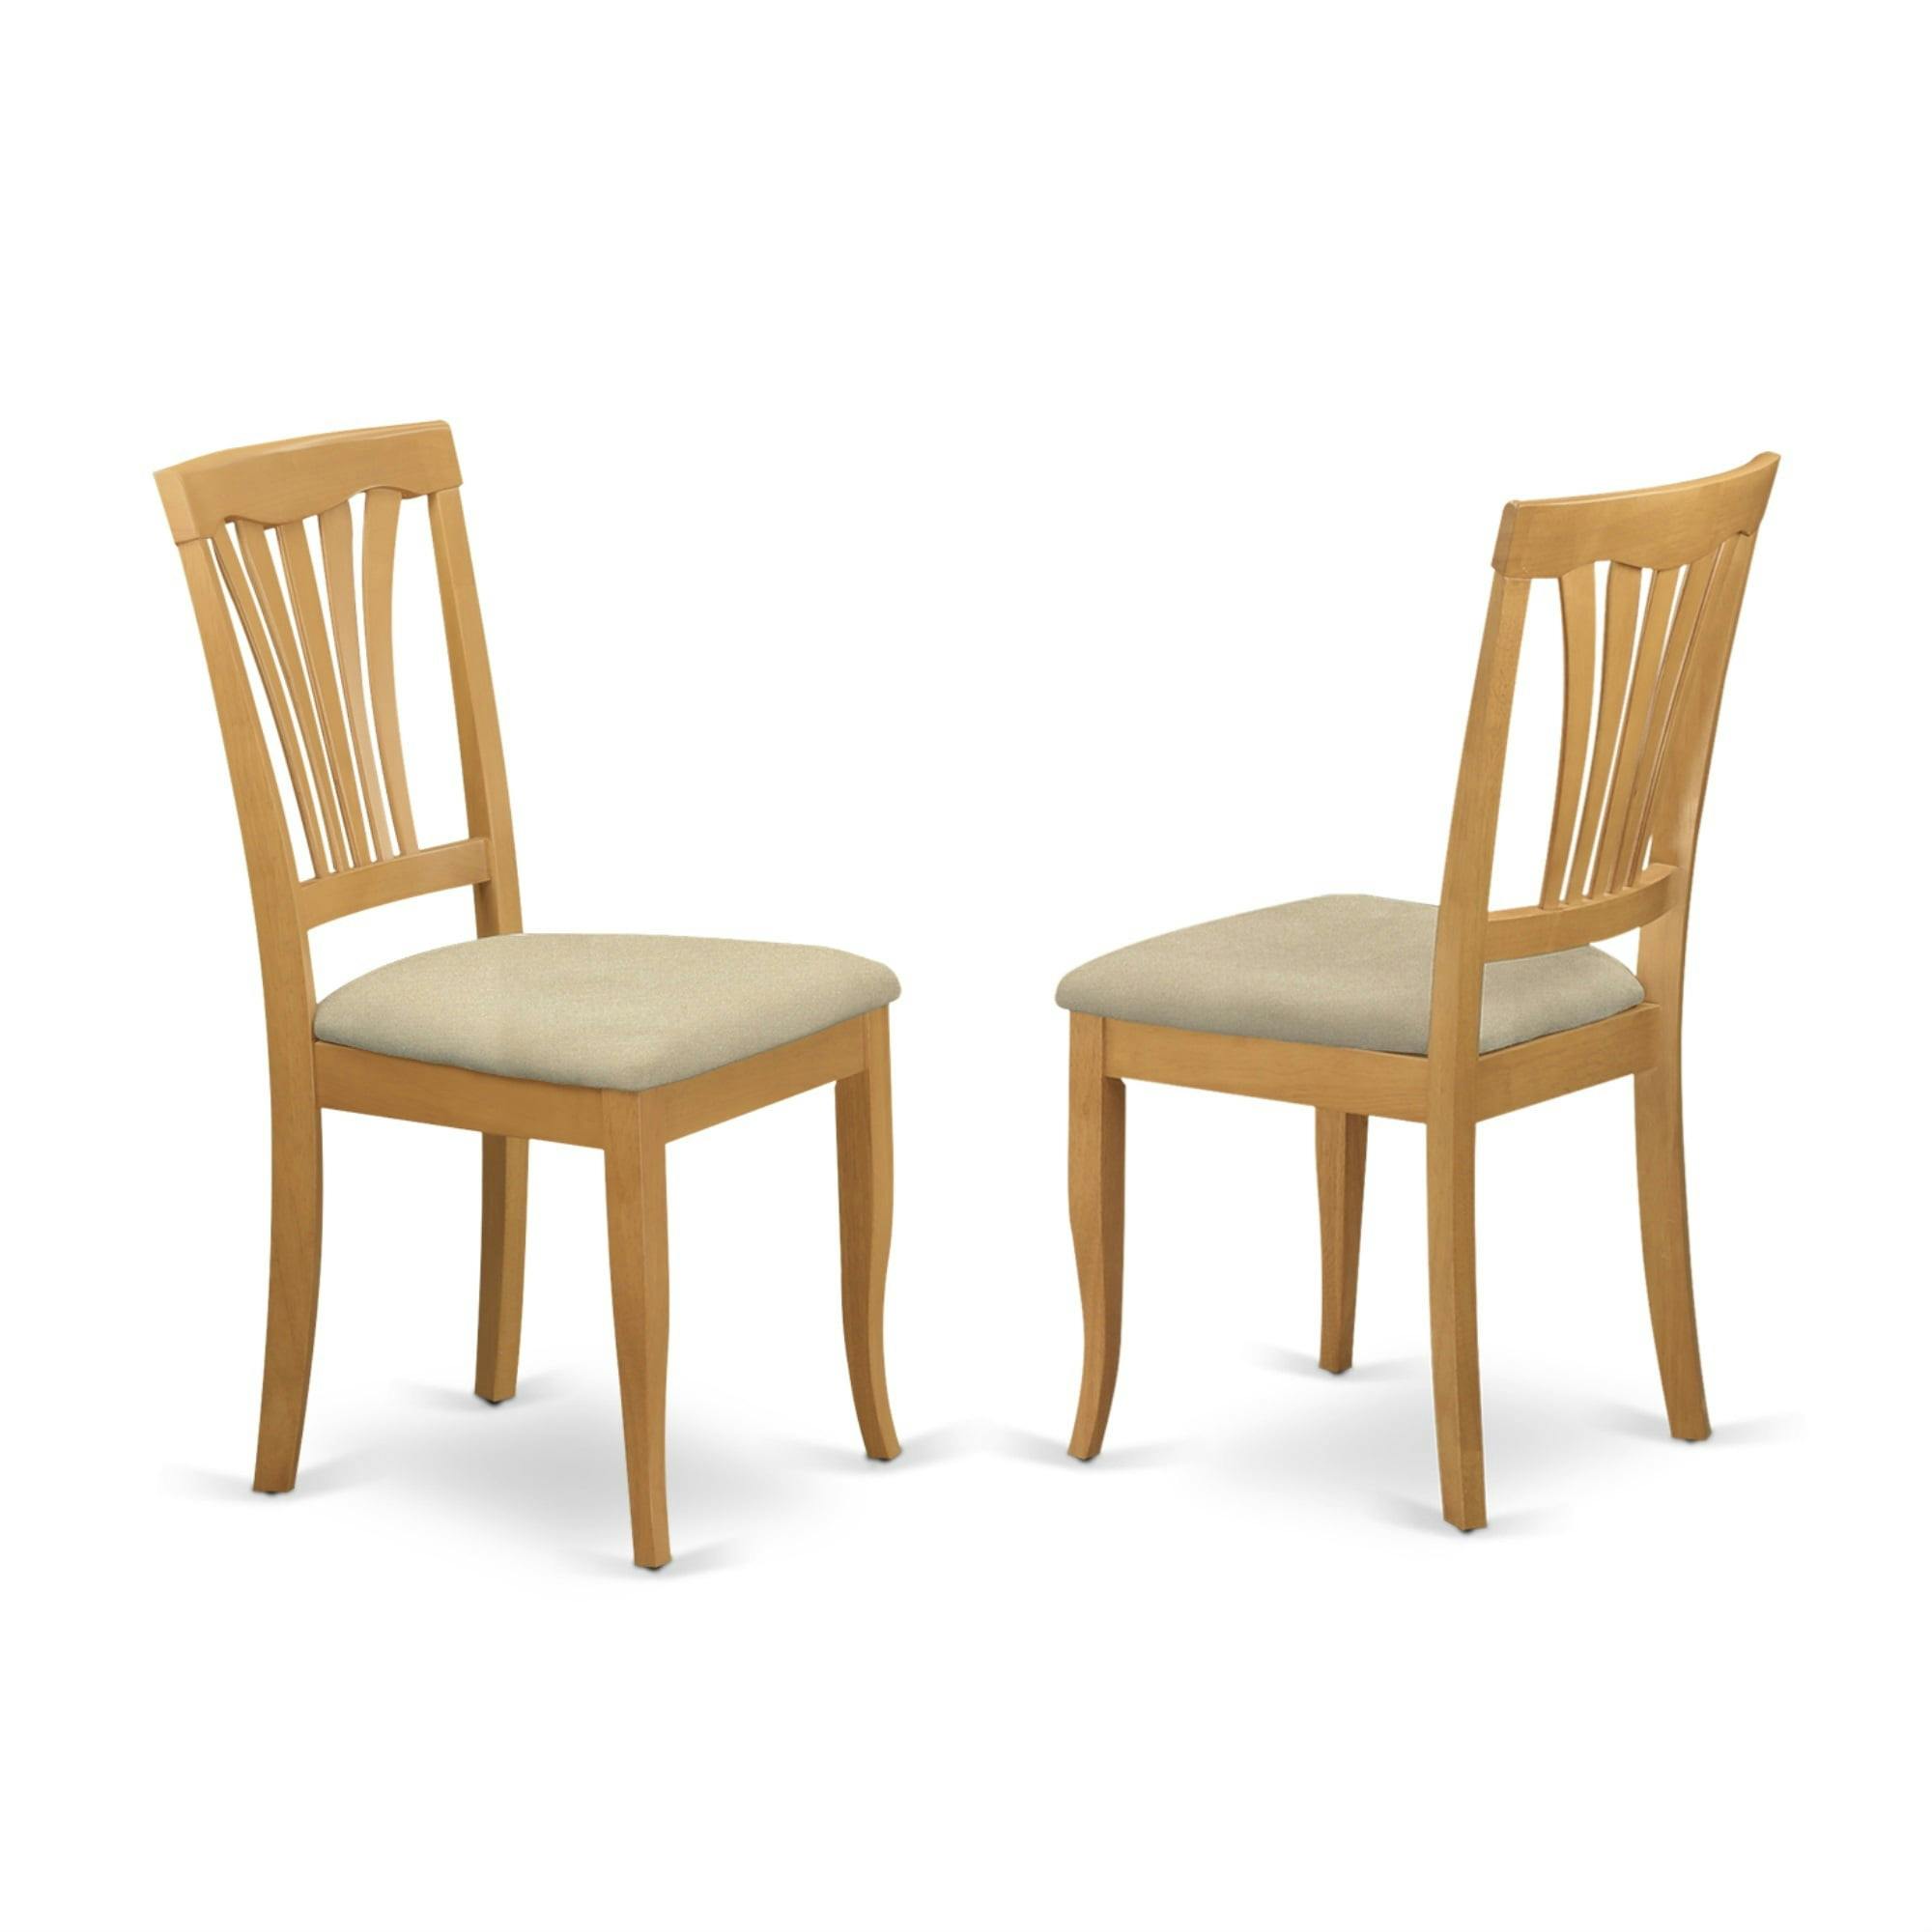 Avon Linen Fabric Upholstered Oak Dining Chairs - Set of 2